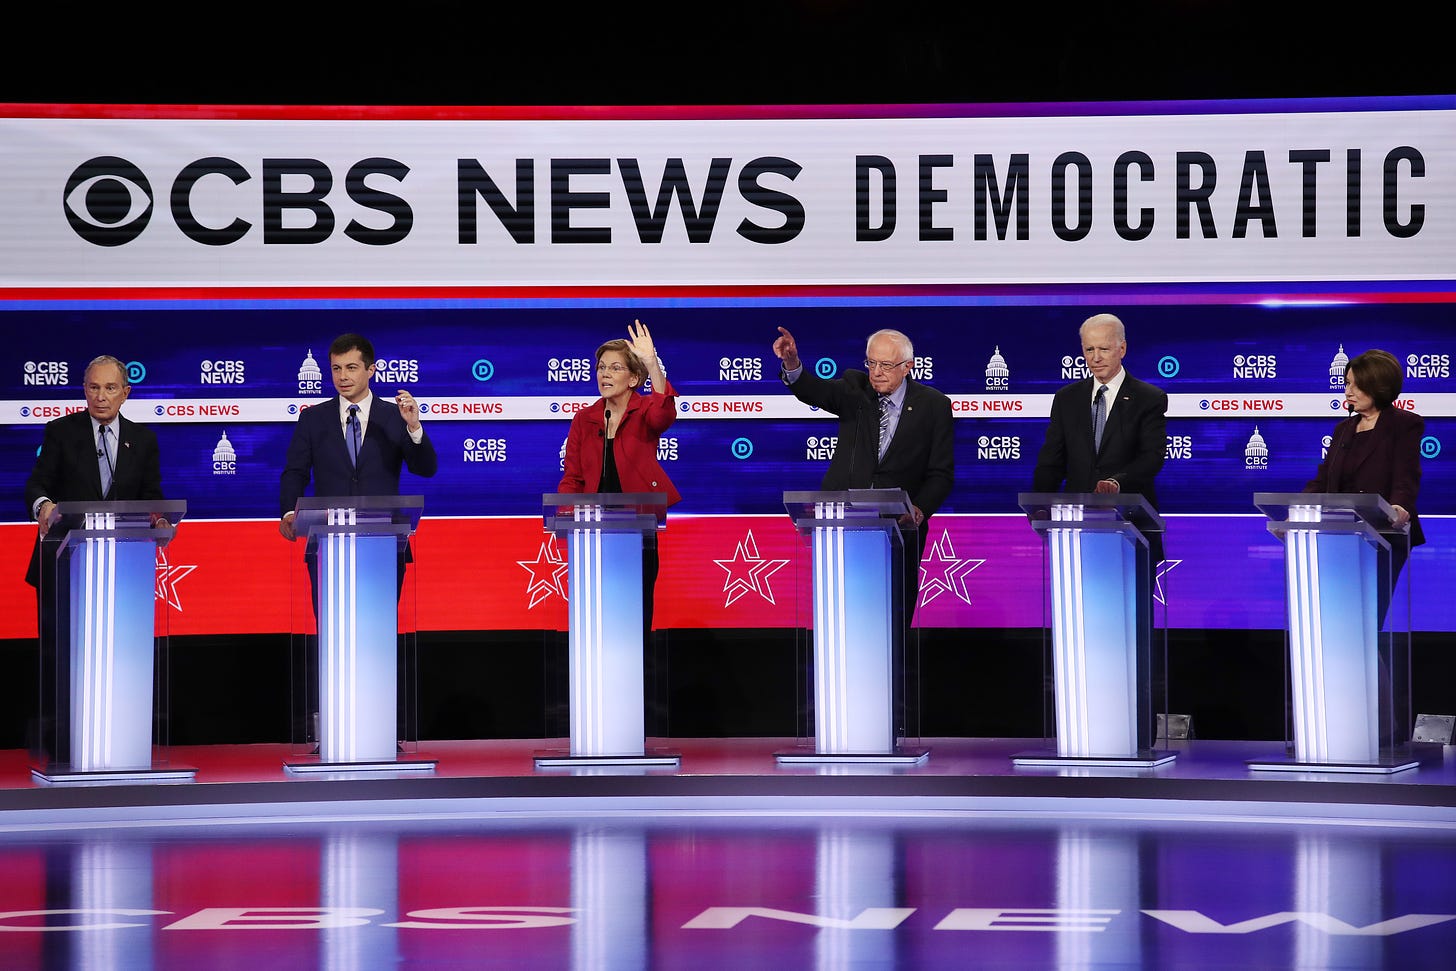 Democratic presidential primary debate at the Charleston Gaillard Center on February 25, 2020. (Photo by Win McNamee/Getty Images)